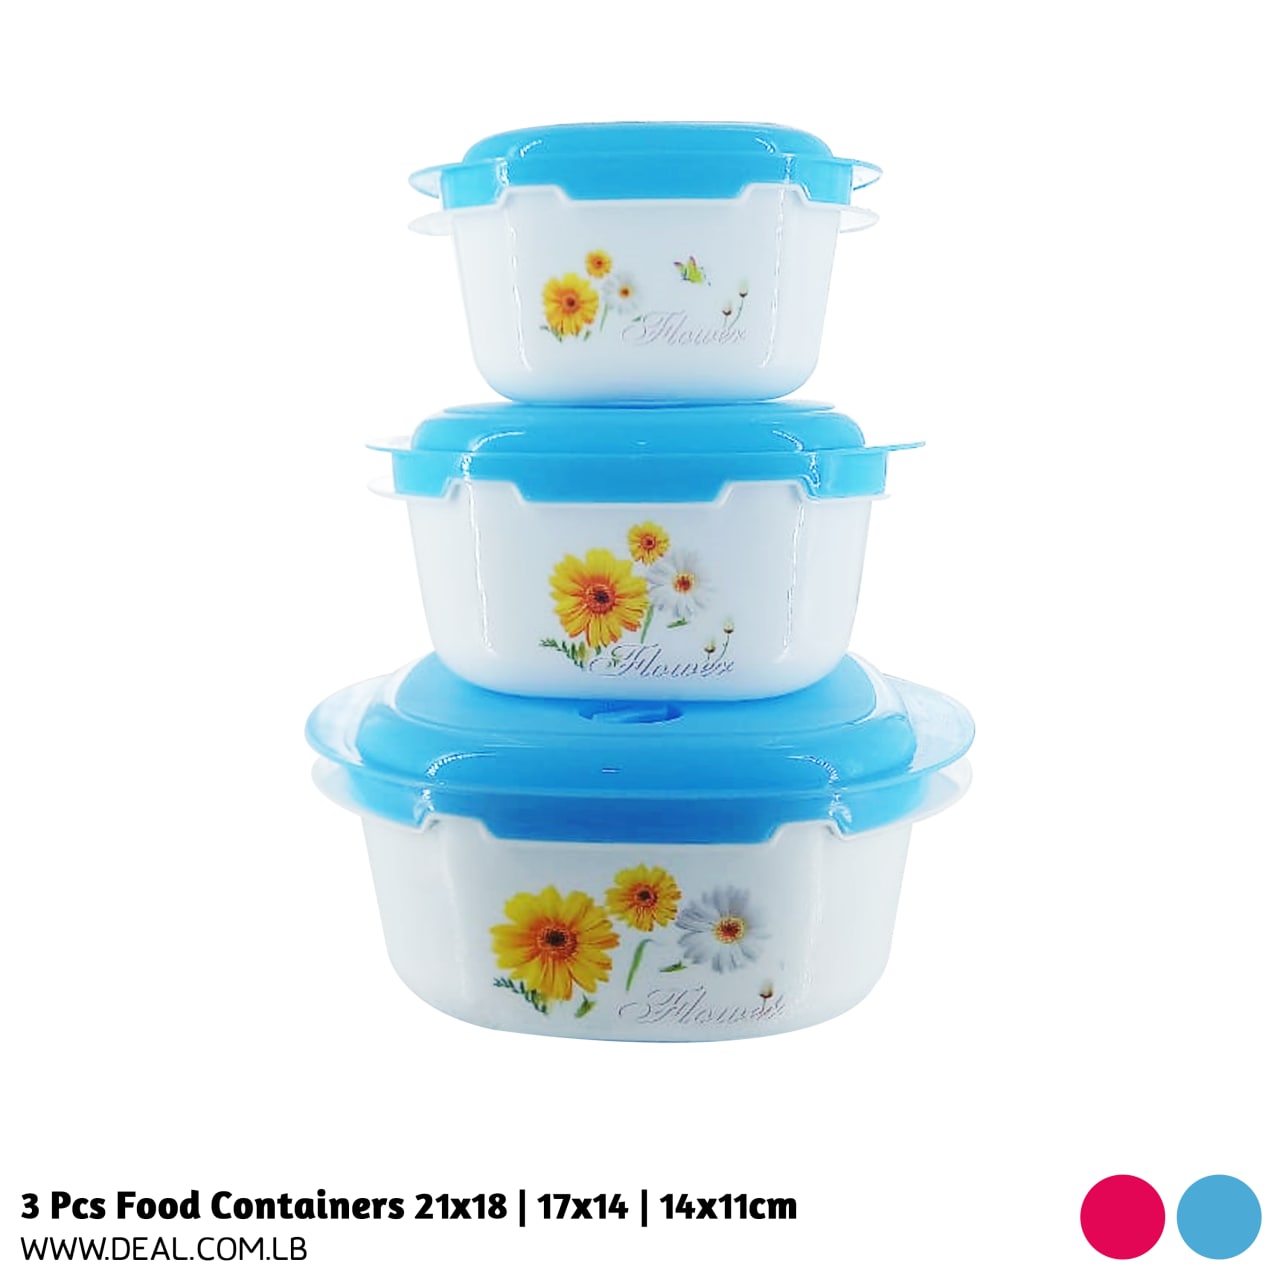 3 Pcs Food Containers 21x18 - 17x14 - 14x11cm